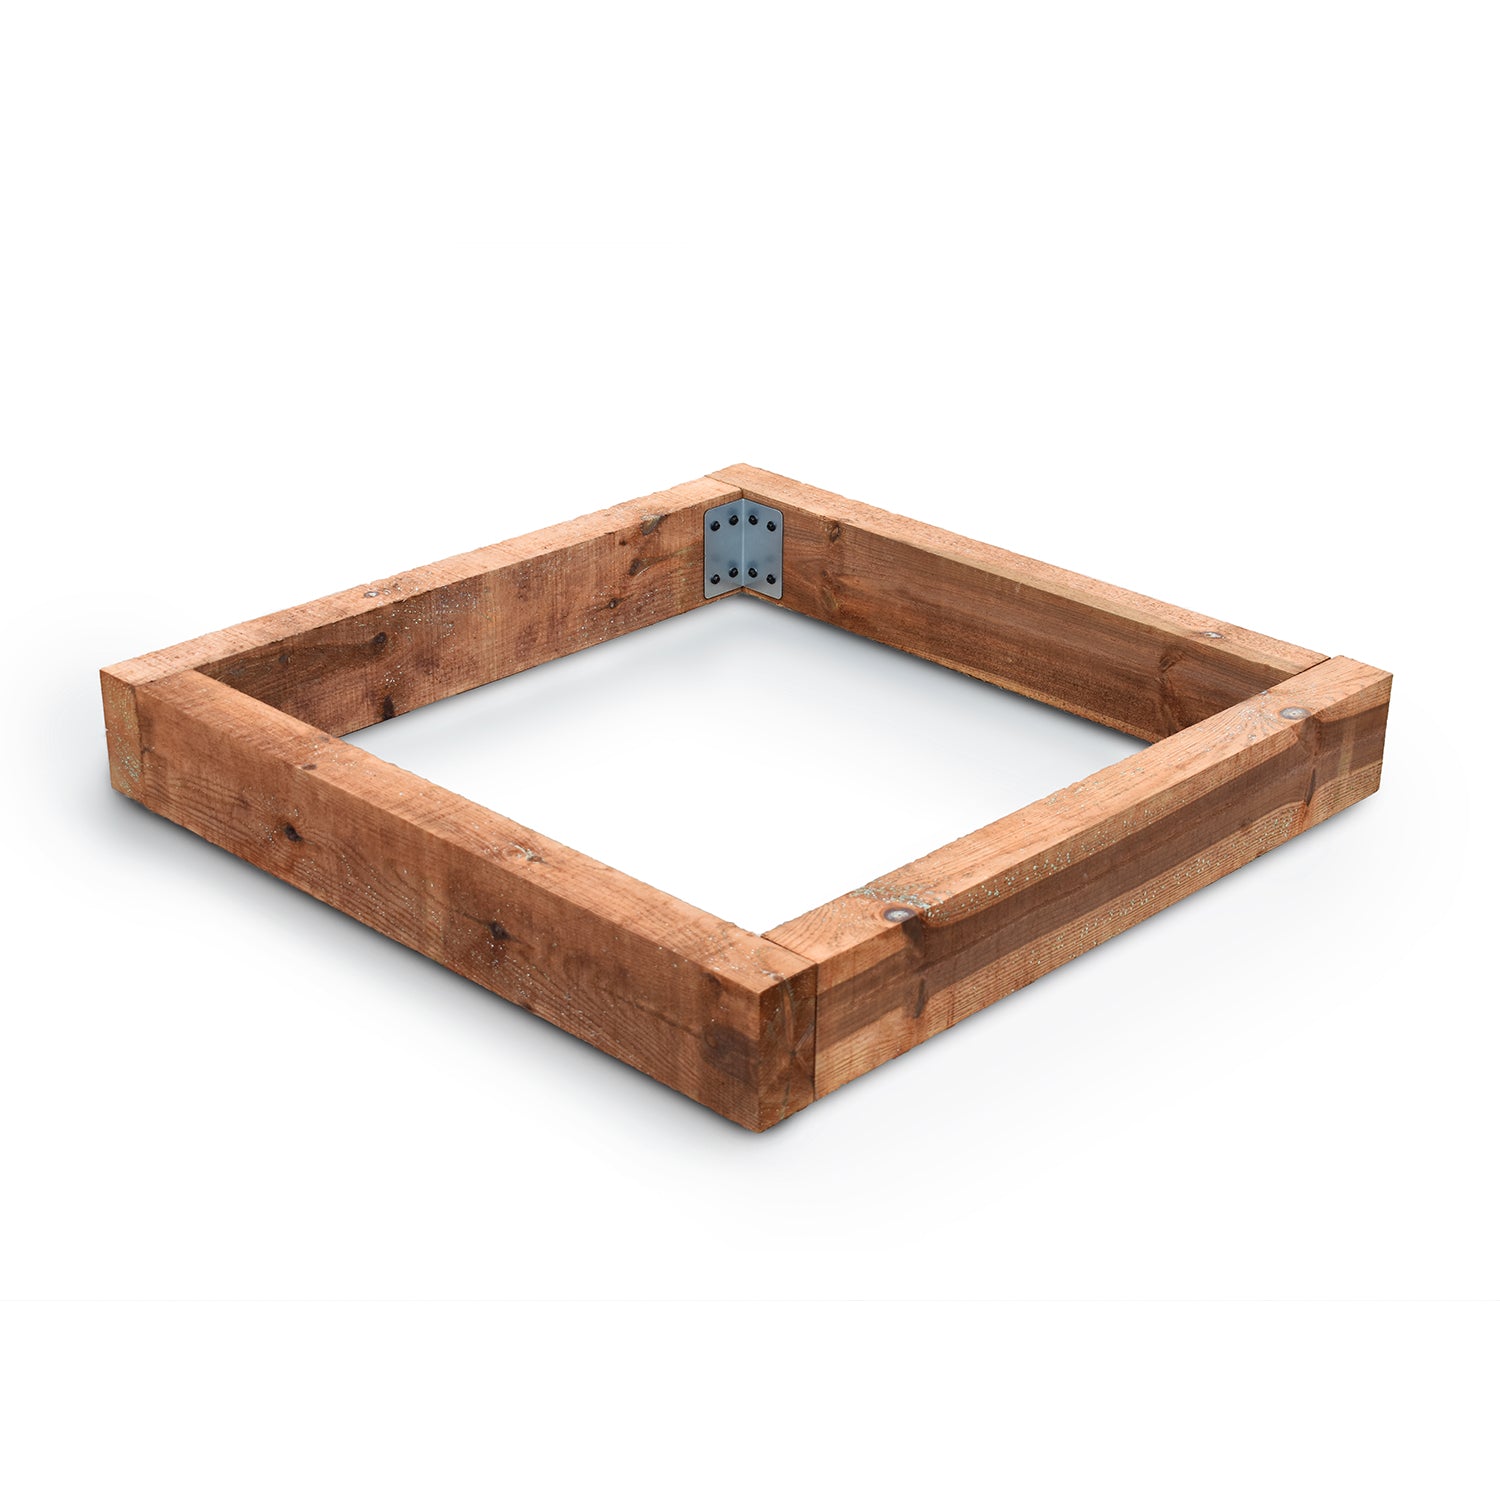 1-Tier Planter made with Railway Sleepers on a white background.